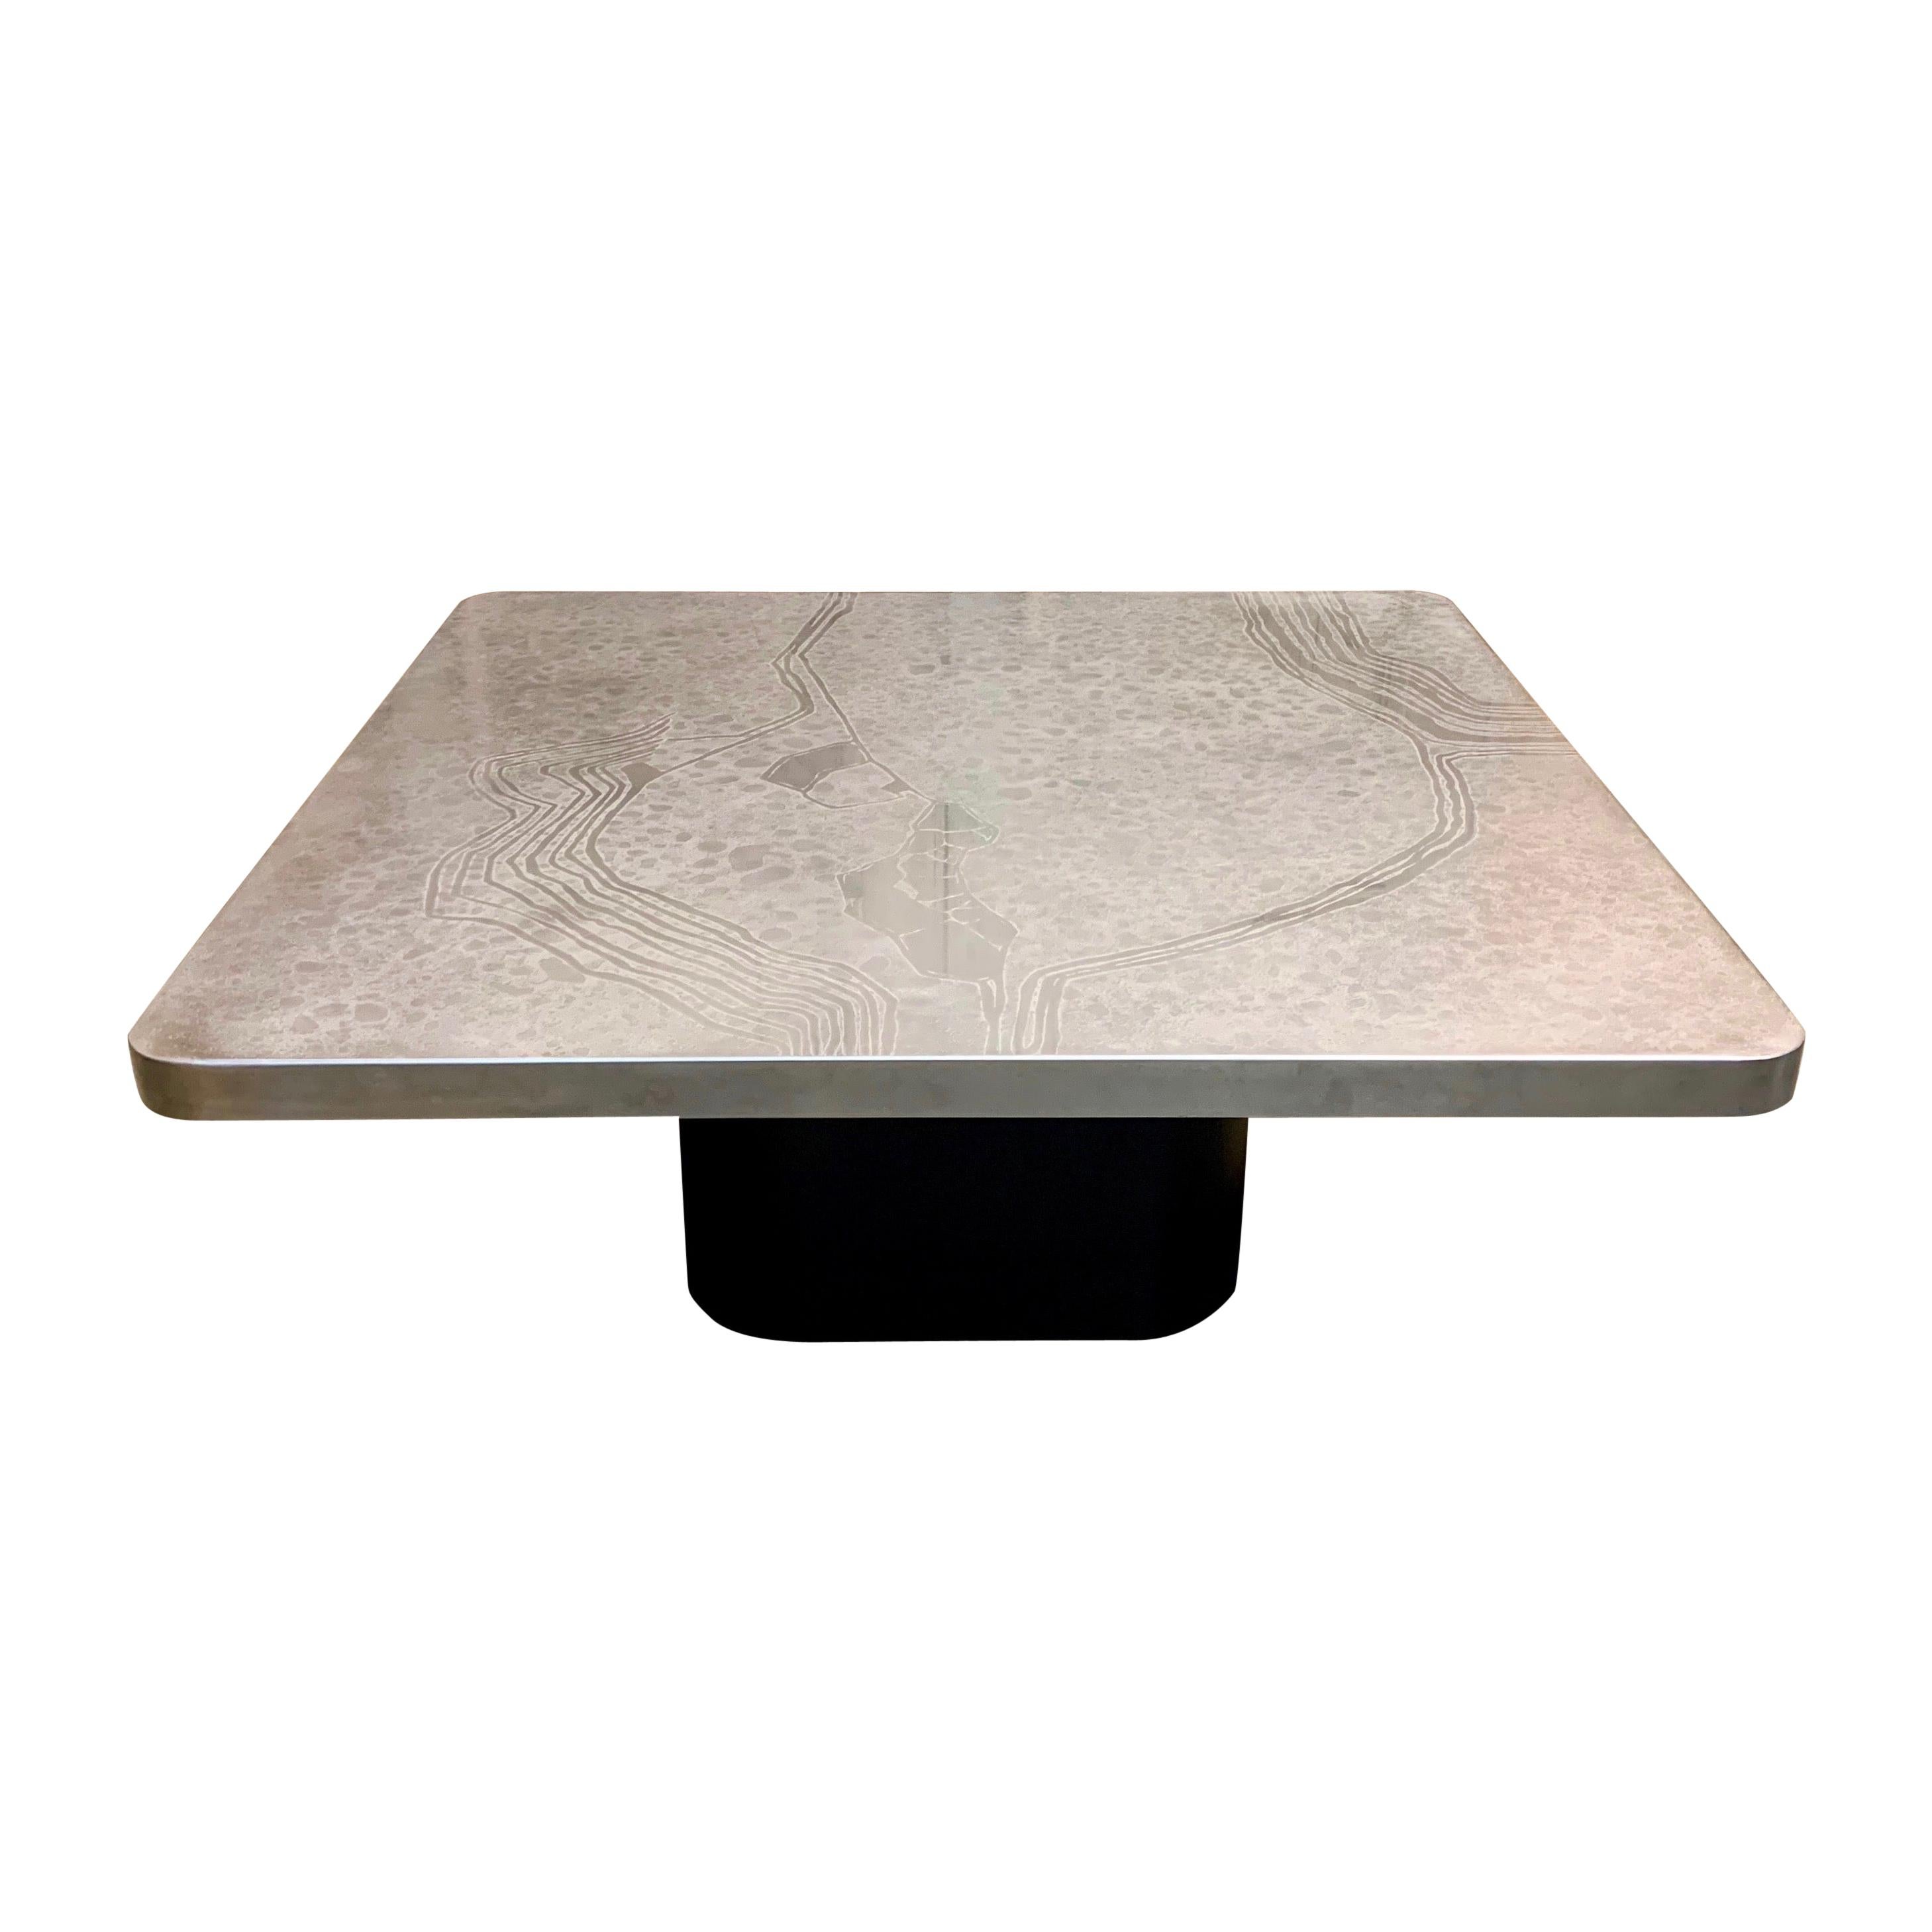 Etched Heinz Lilienthal Coffee Table